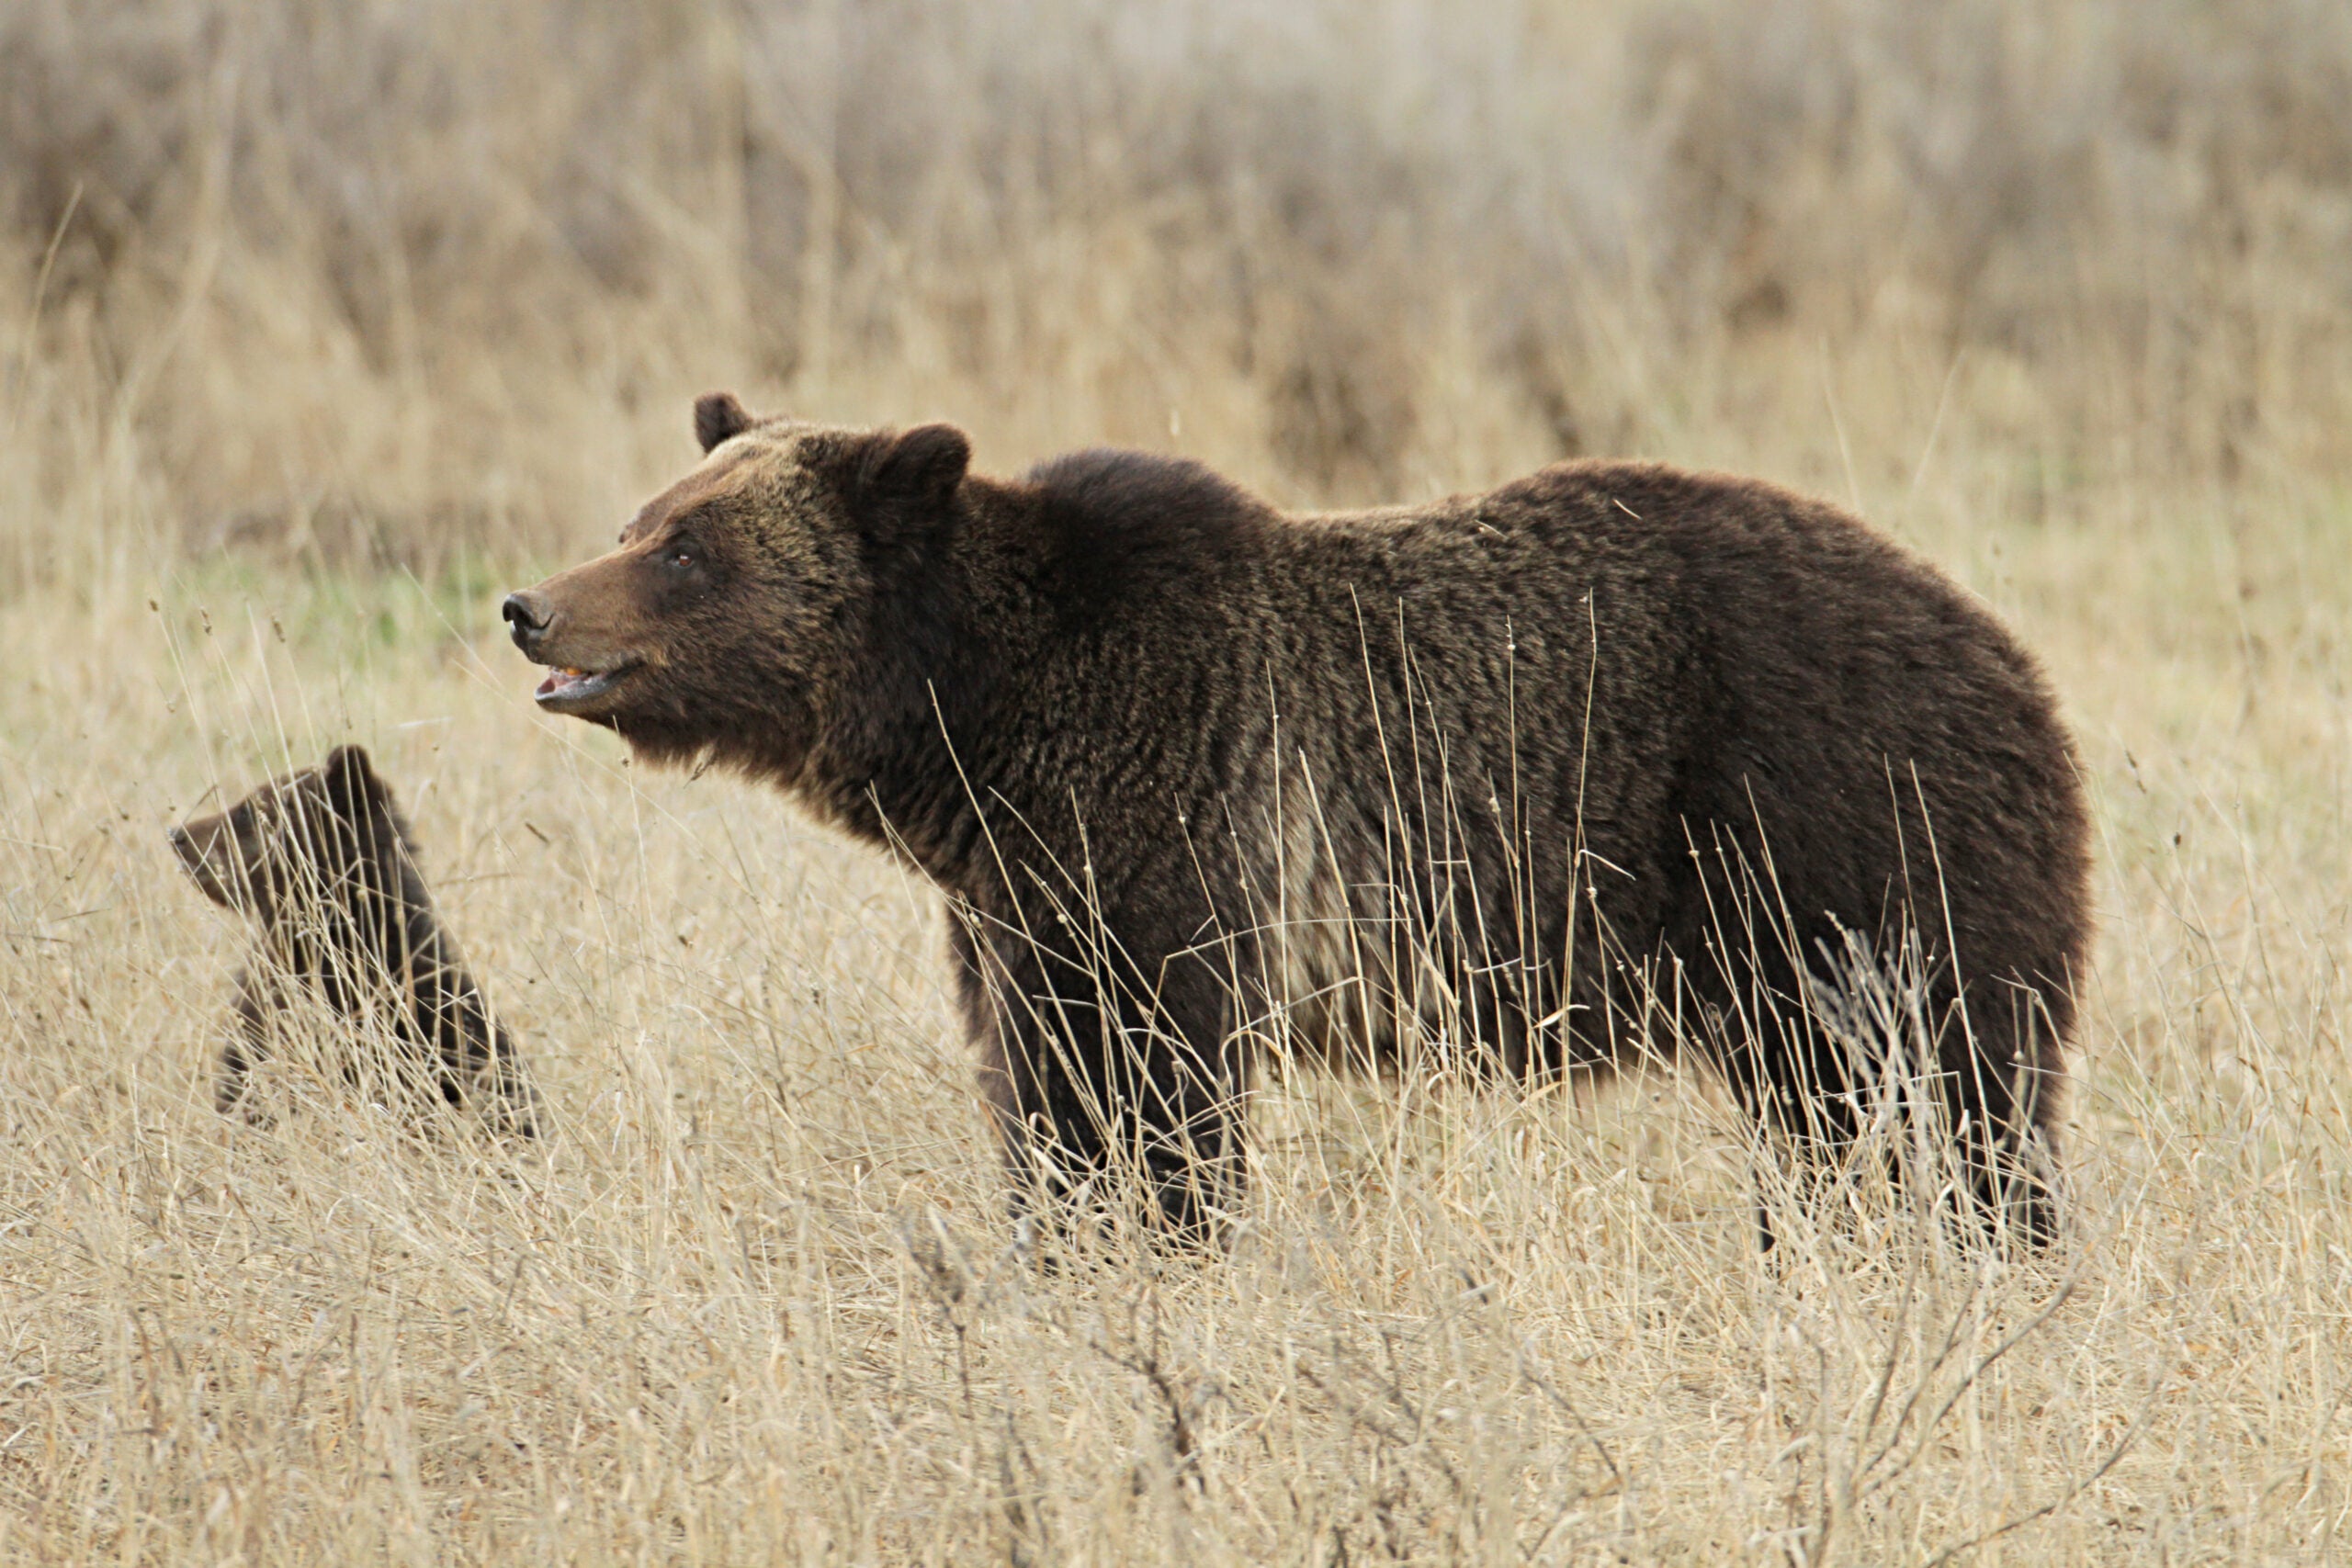 Idaho Poachers Sentenced After Admitting to Shooting Grizzly Sow 40 Times